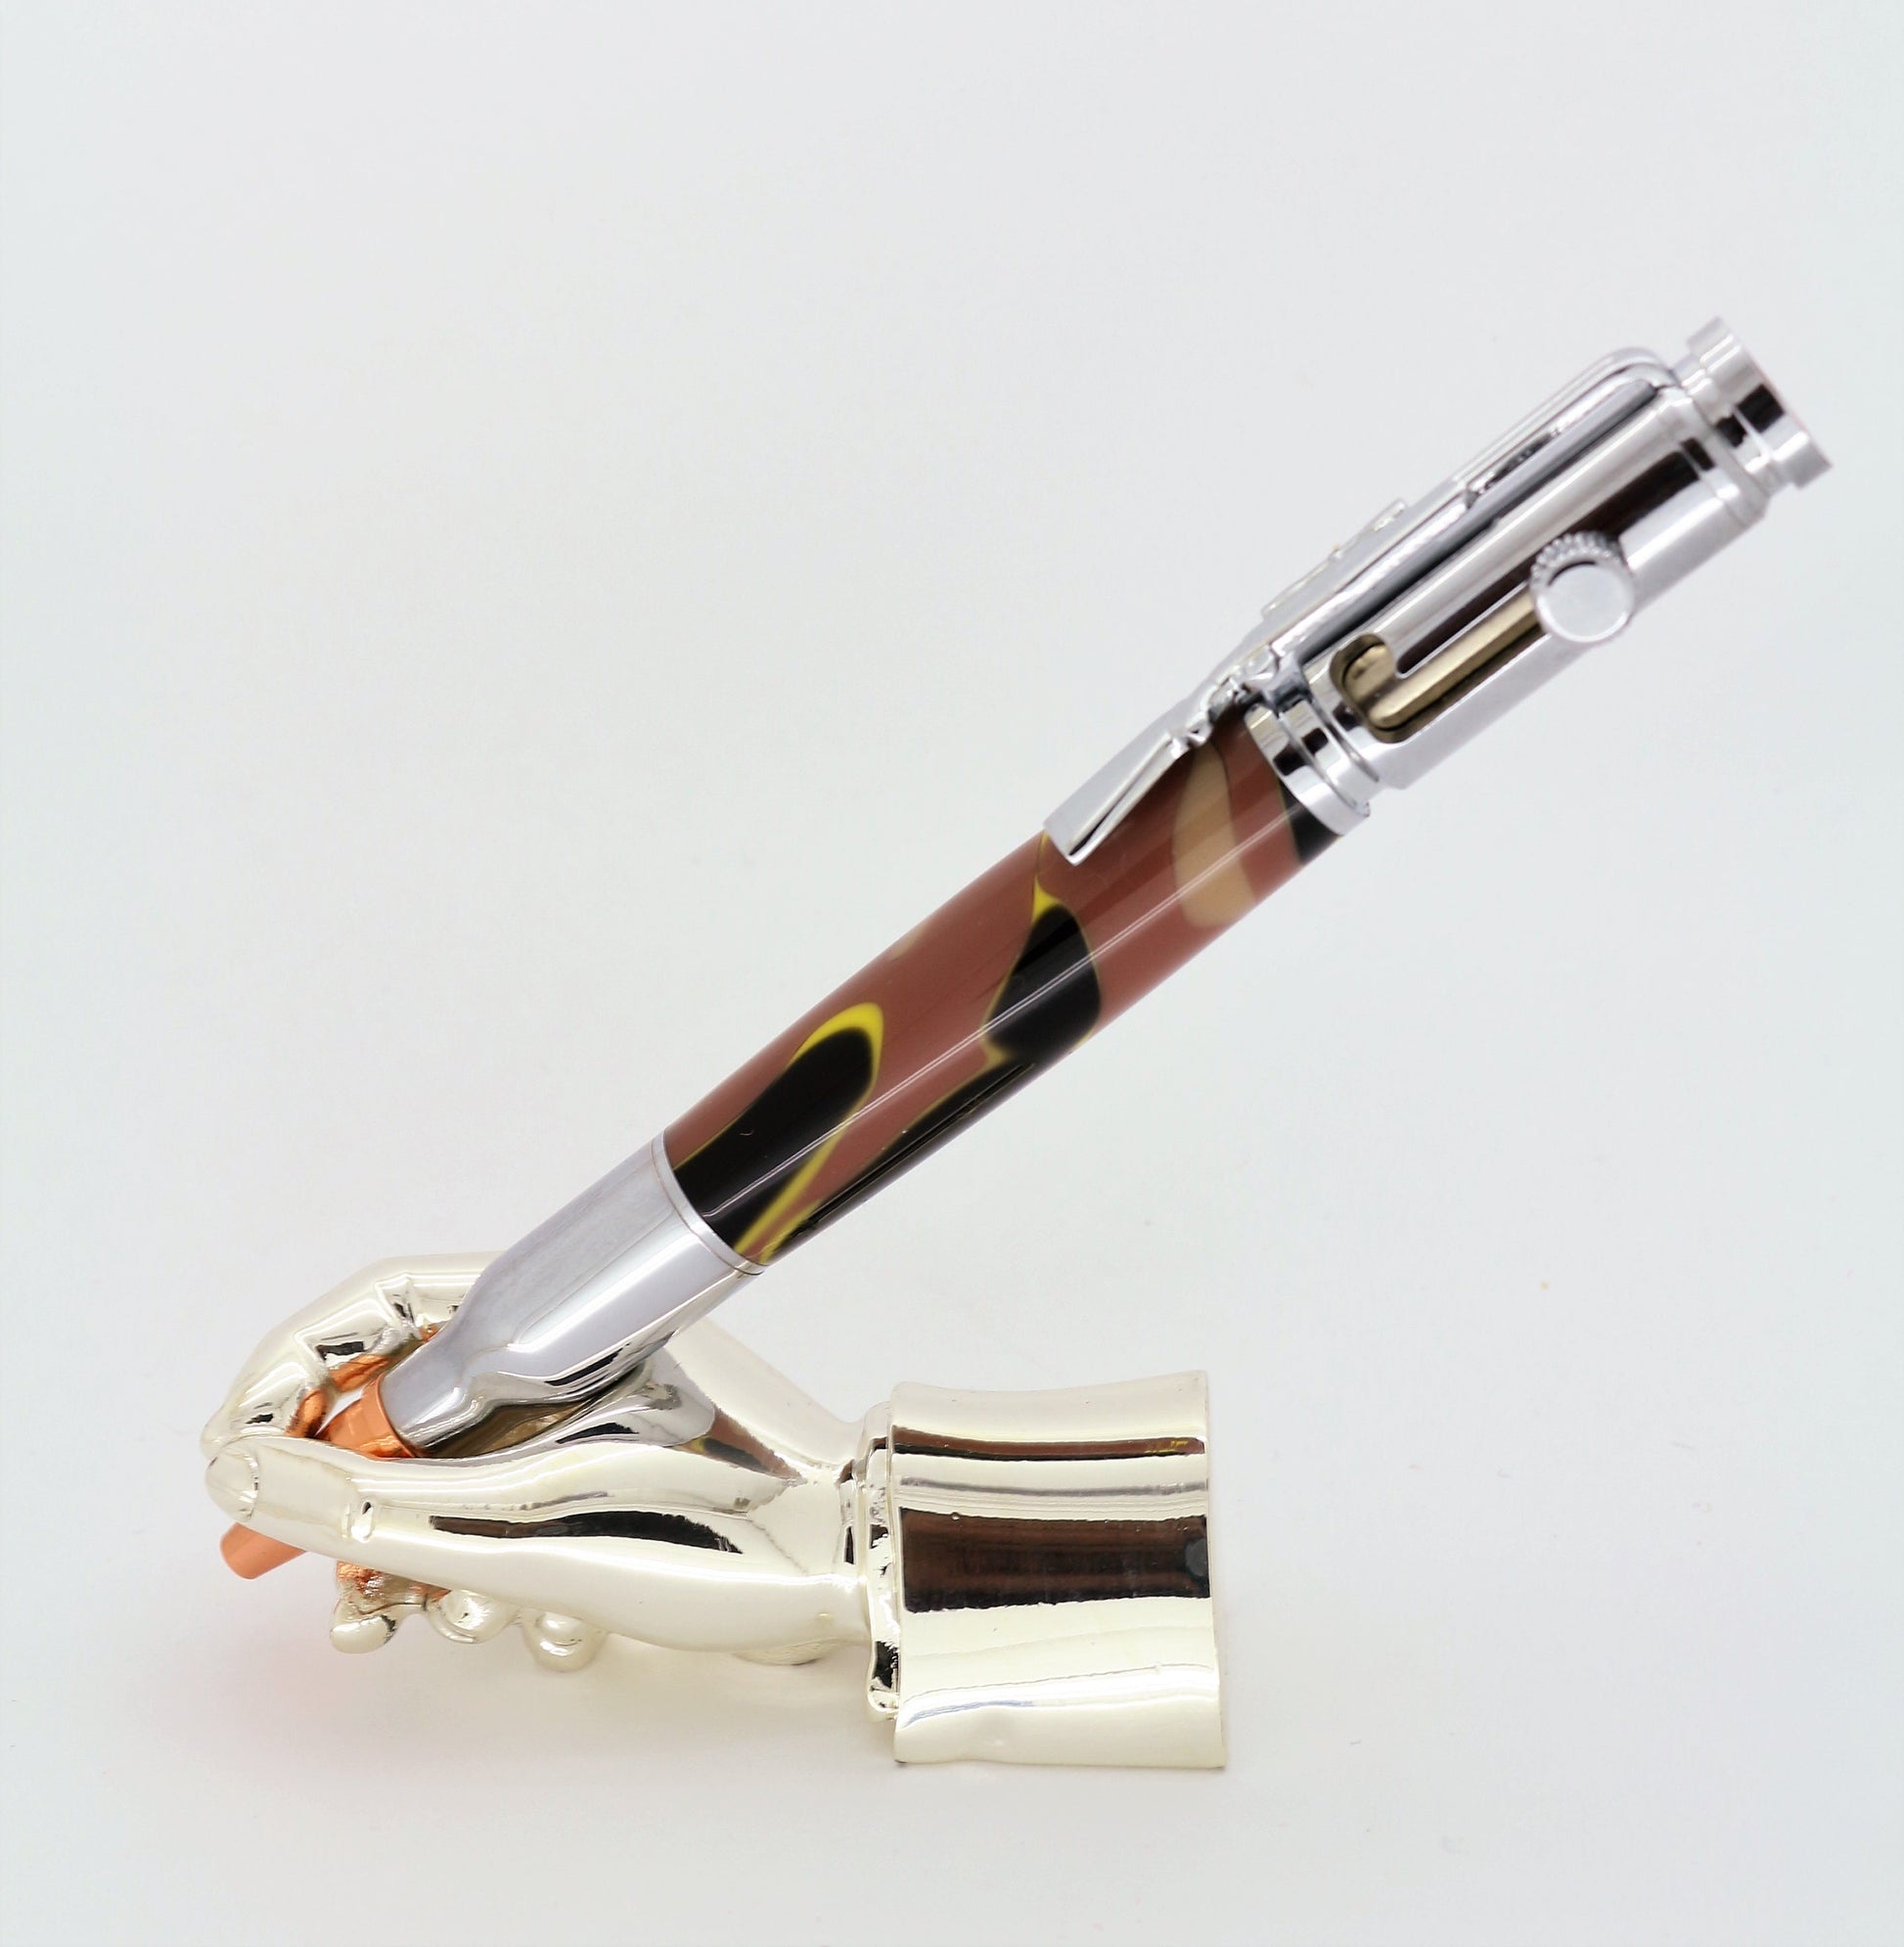 A right hand shaped metal base holding a handturned yellow cammo acrylic Bolt action pen as you would hold it to write with.